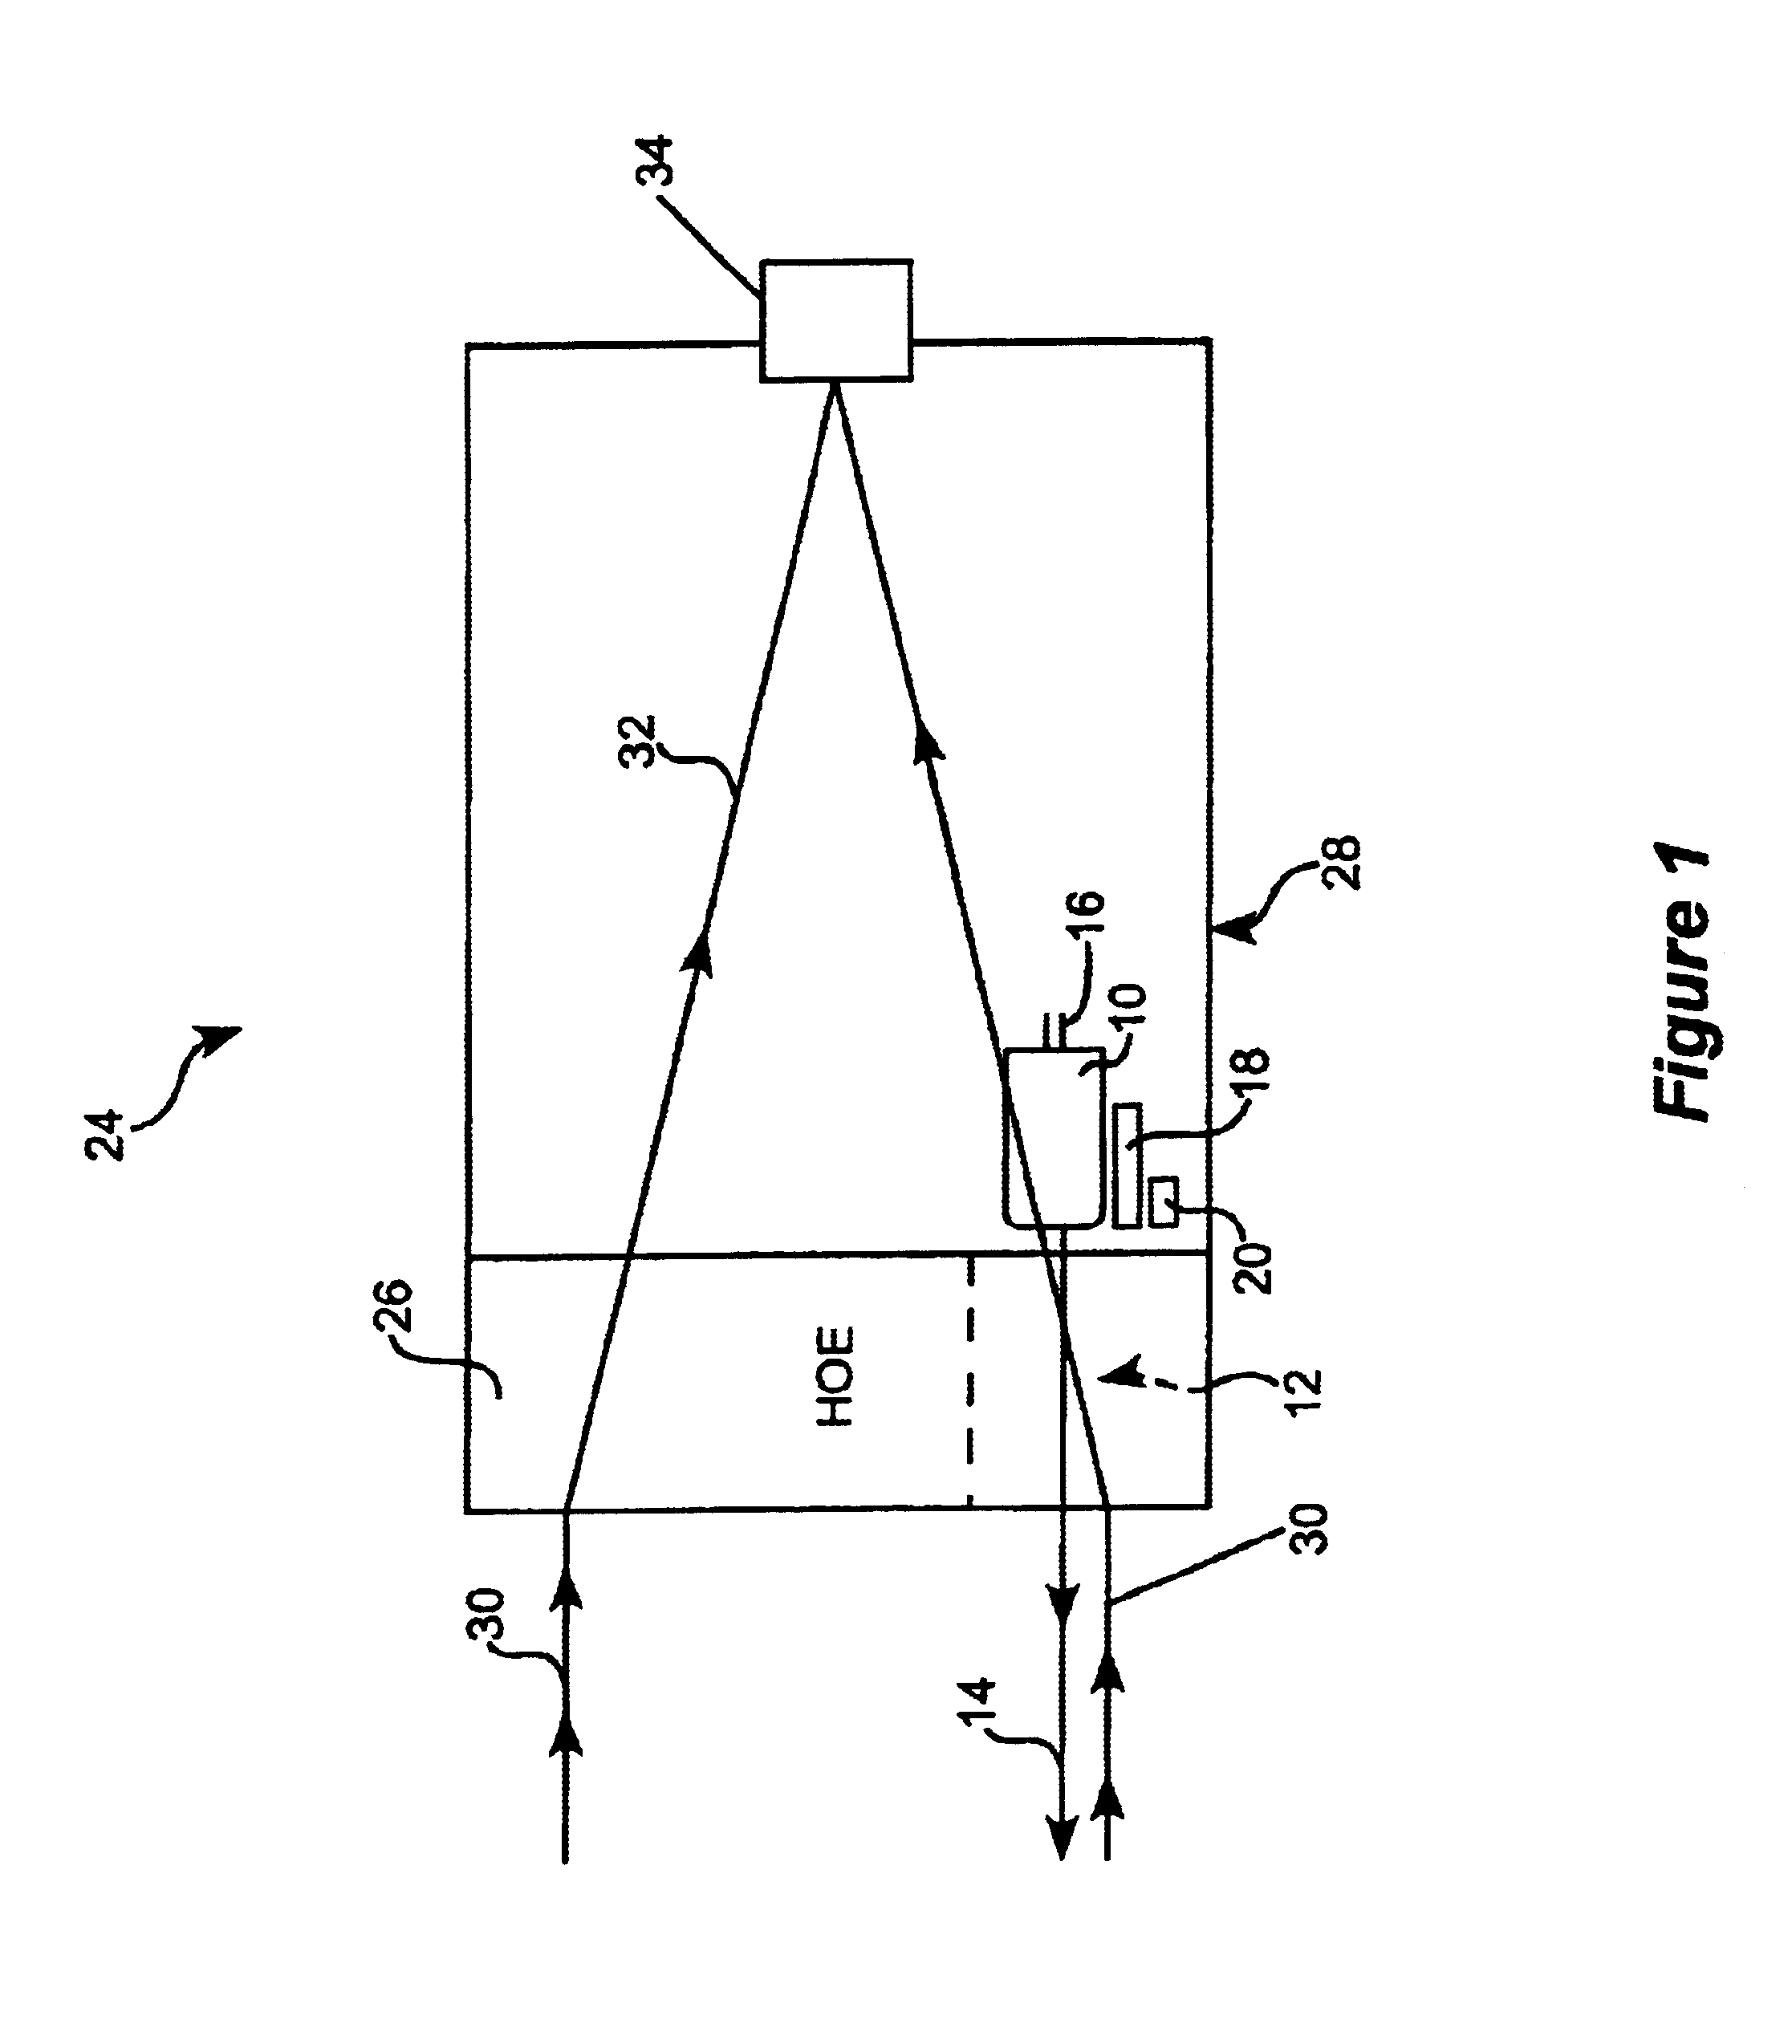 Transceiver for a wireless optical telecommunication system